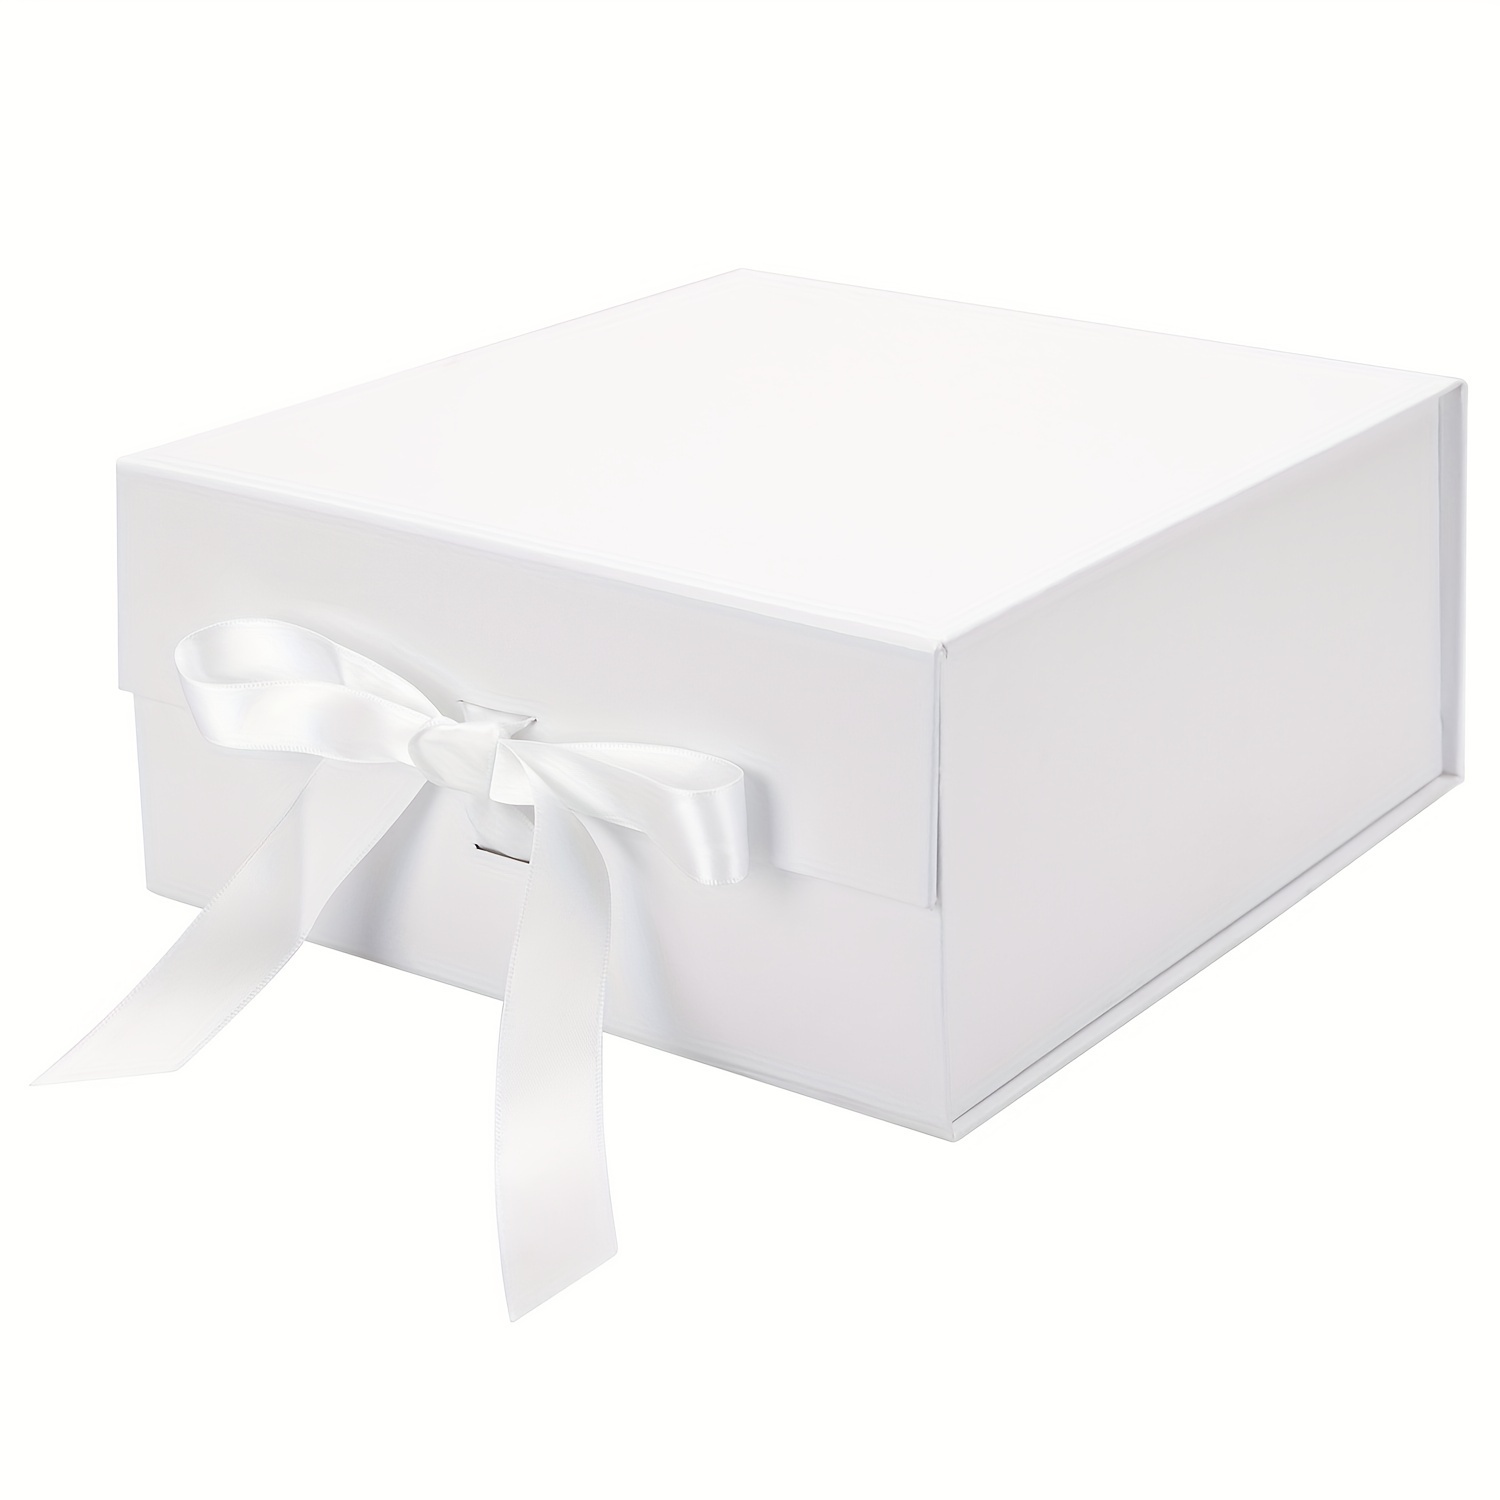 4-Pack Gift Boxes with Magnetic Lids, Large Collapsible Gift Wrap